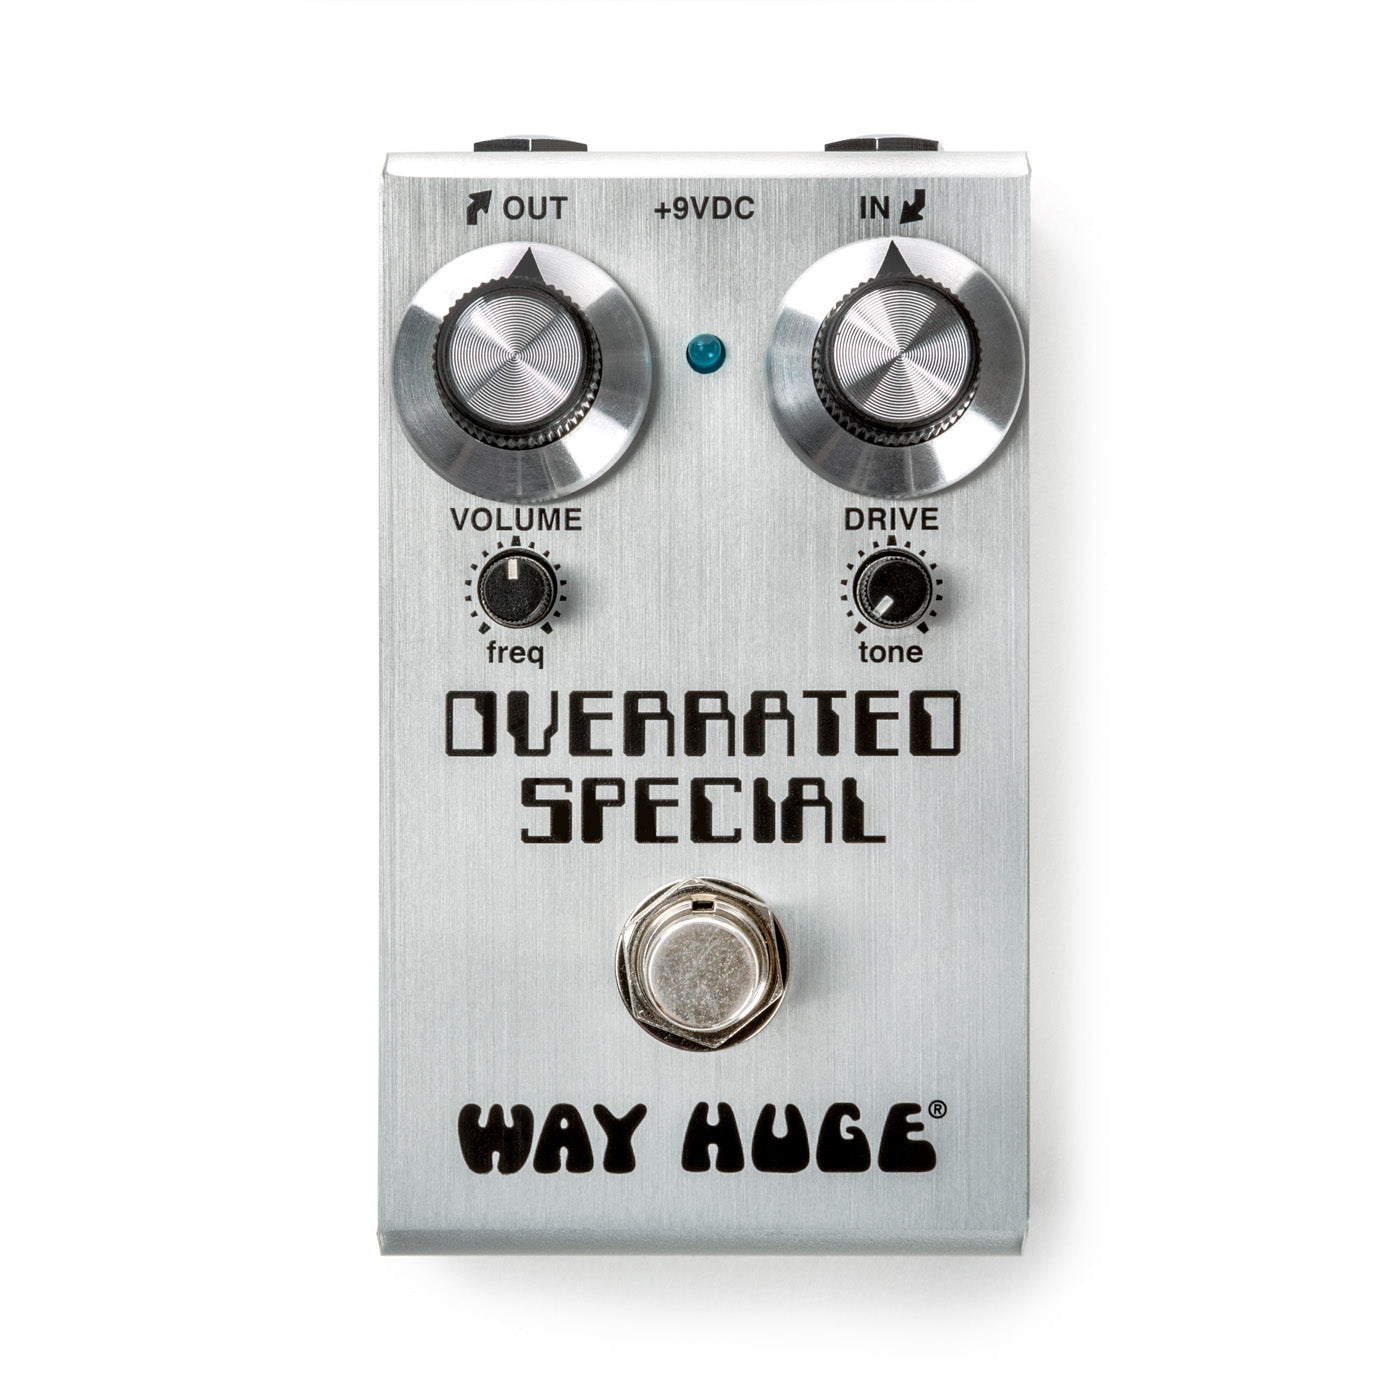 Way Huge Overrated Special Overdrive Mini